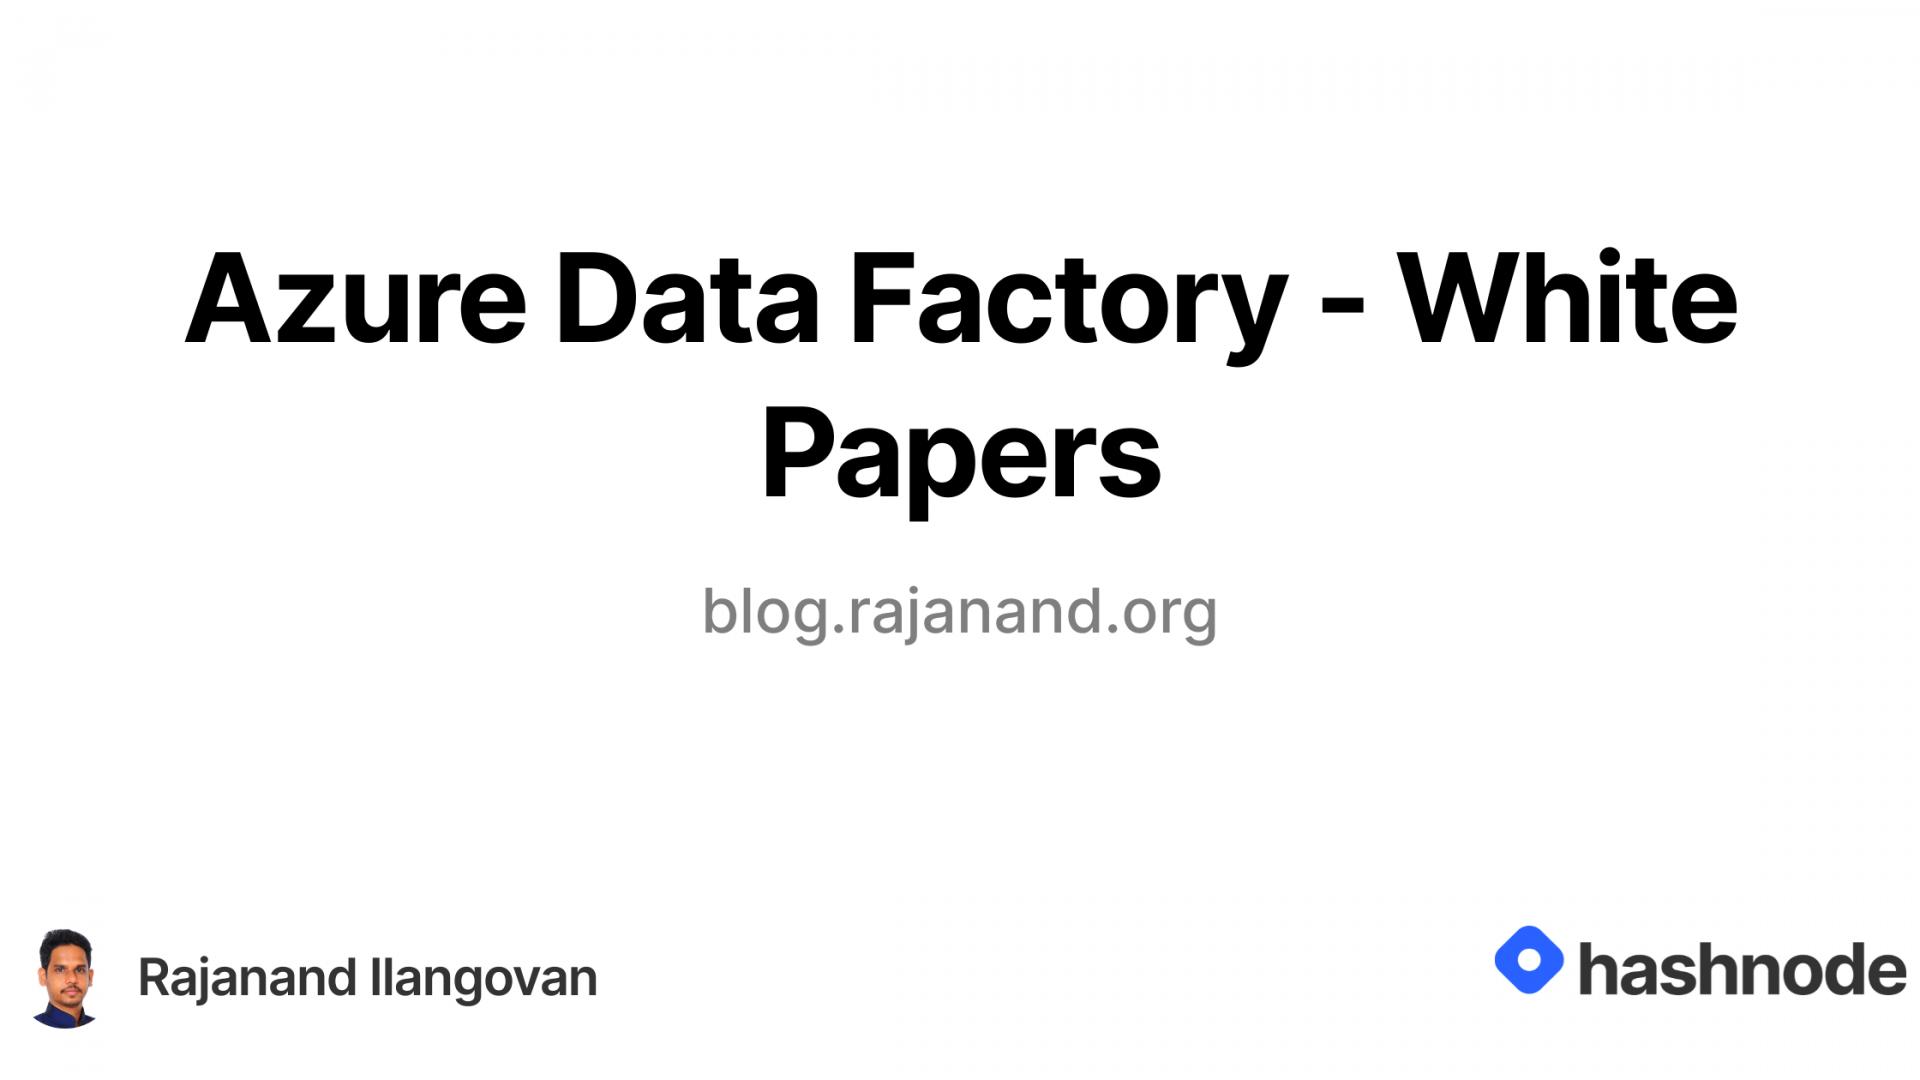 Azure Data Factory - White Papers